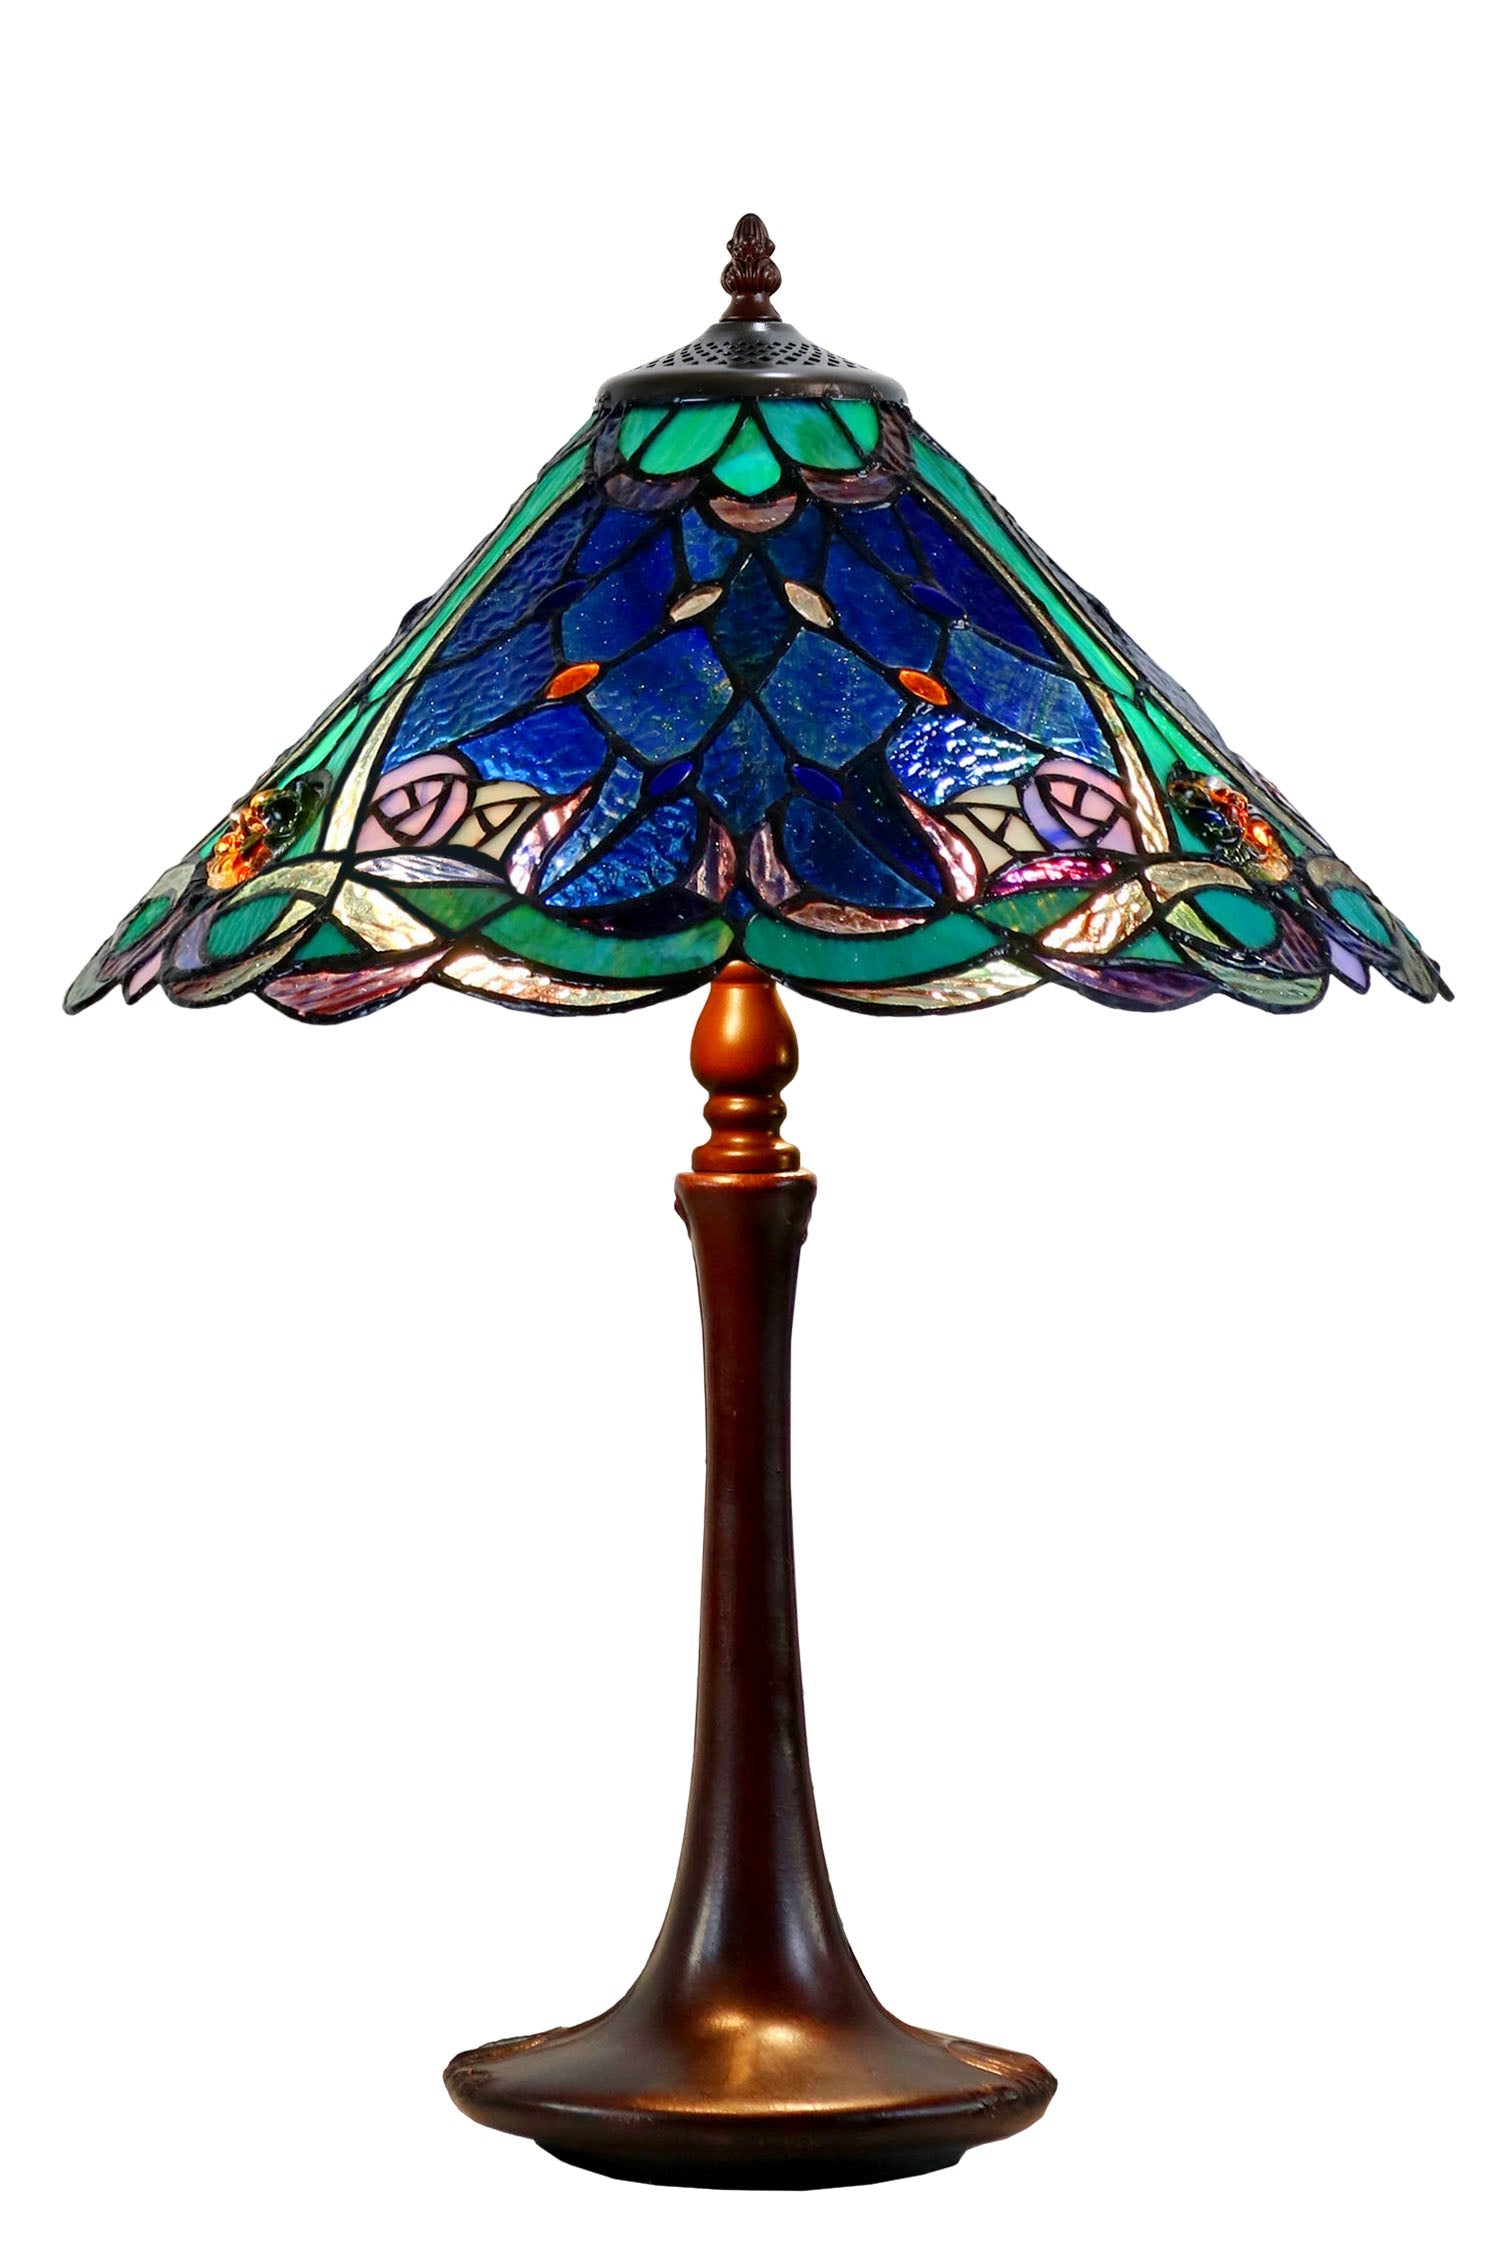 Large 16" Tiffany-style Desert Rose Stained Glass 23-inches High Table Lamp*blue